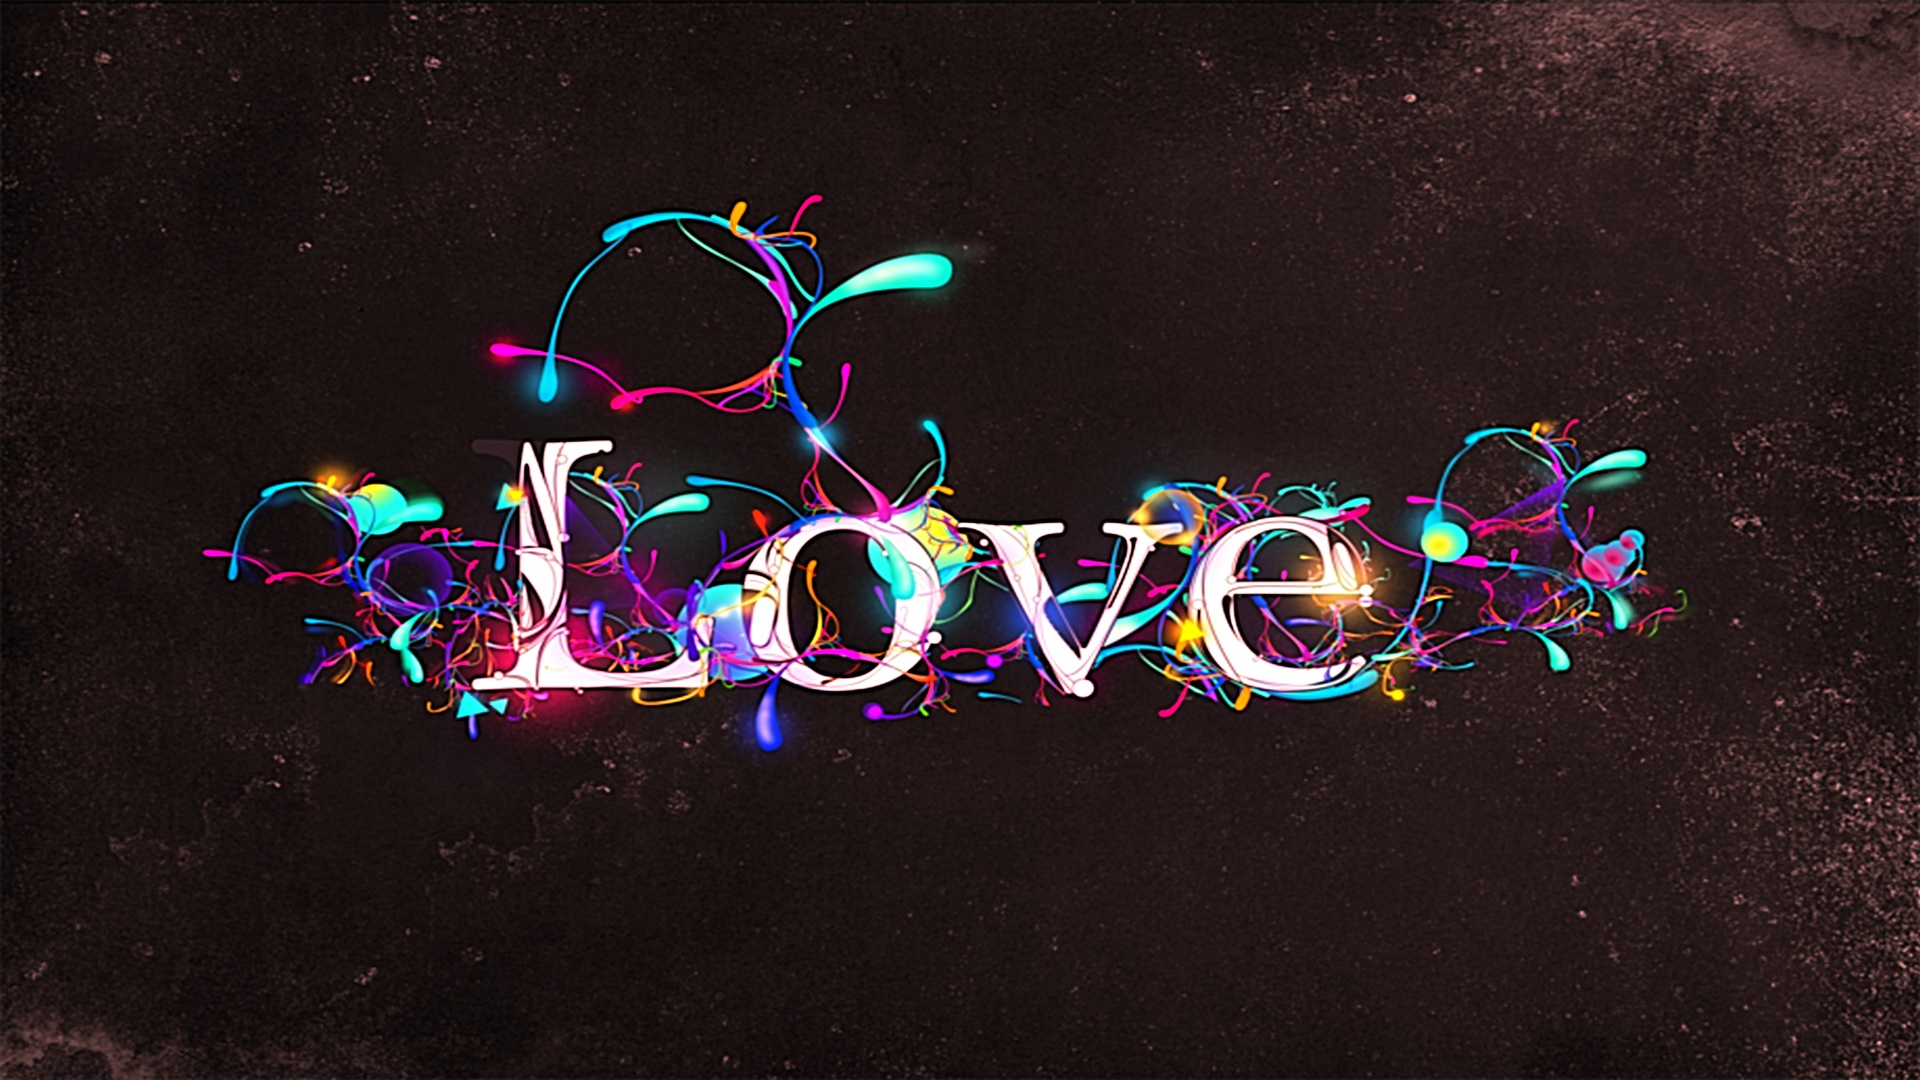 Love Hd Wallpapers - Graphic Design About Love - 1920x1080 Wallpaper -  